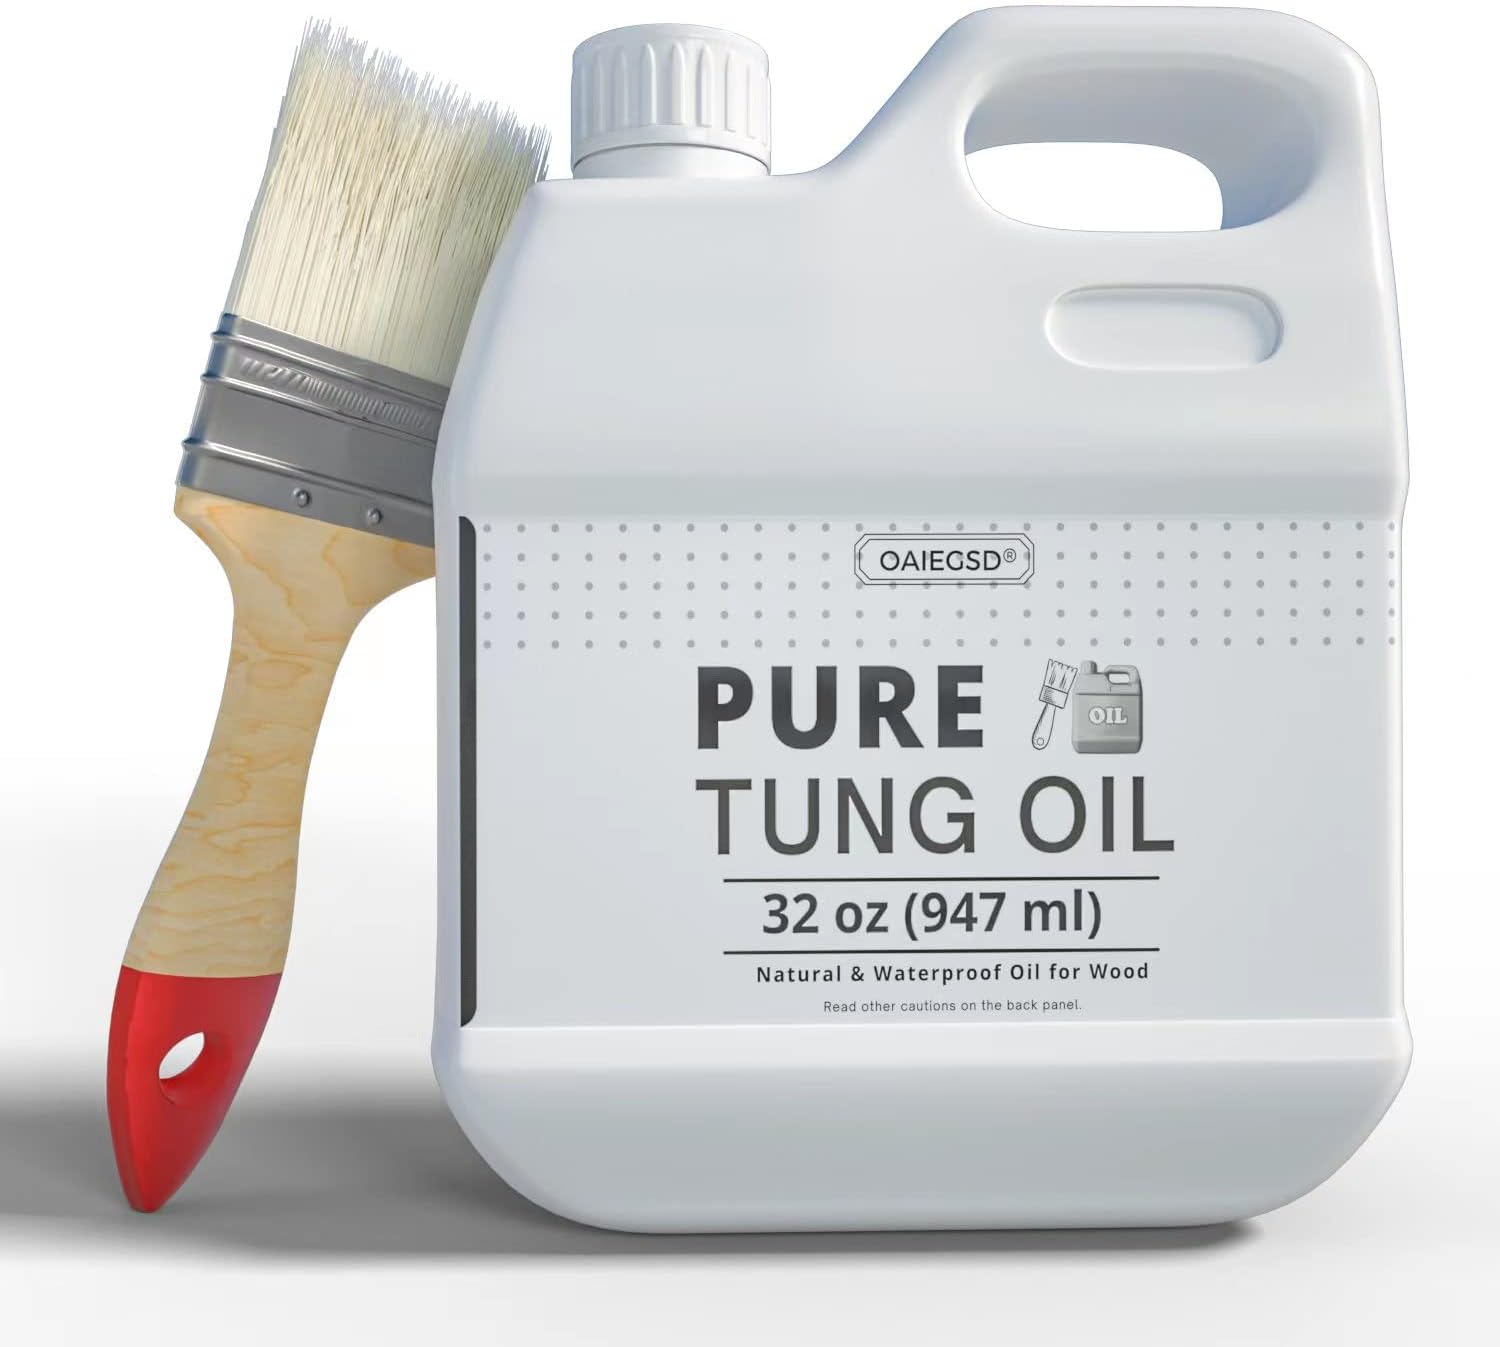 32 OZ Pure Tung Oil for Wood Finishing with Wood Brush, Waterproof Wood Sealer Indoor and Outdoor, 100% Pure Natural Tung Oil for Unfinished Bare Wood, Such as Wood Furniture, Wood Floors